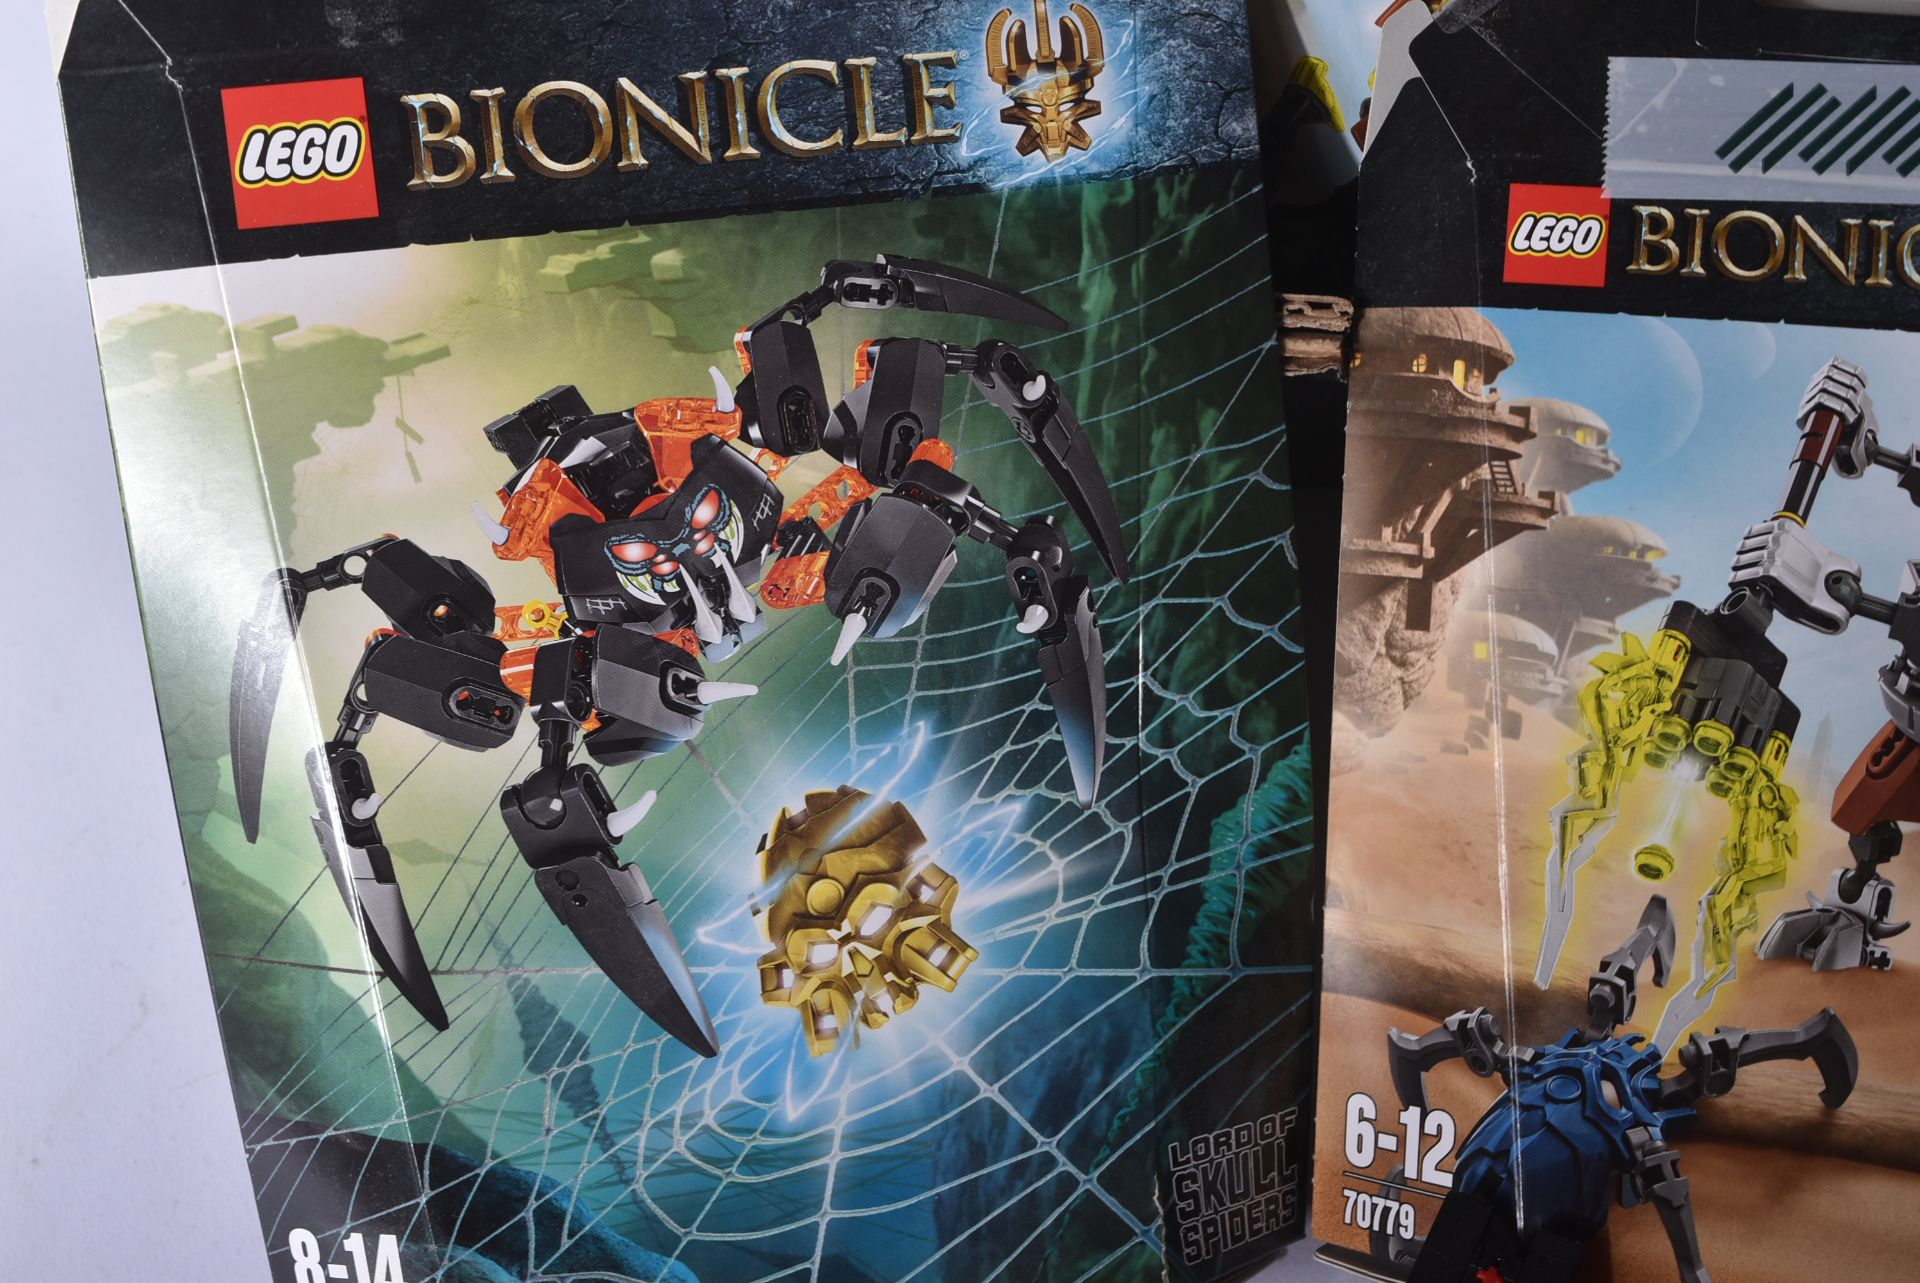 LEGO SETS - COLLECTION OF LEGO BIONICLE SETS - Image 5 of 8